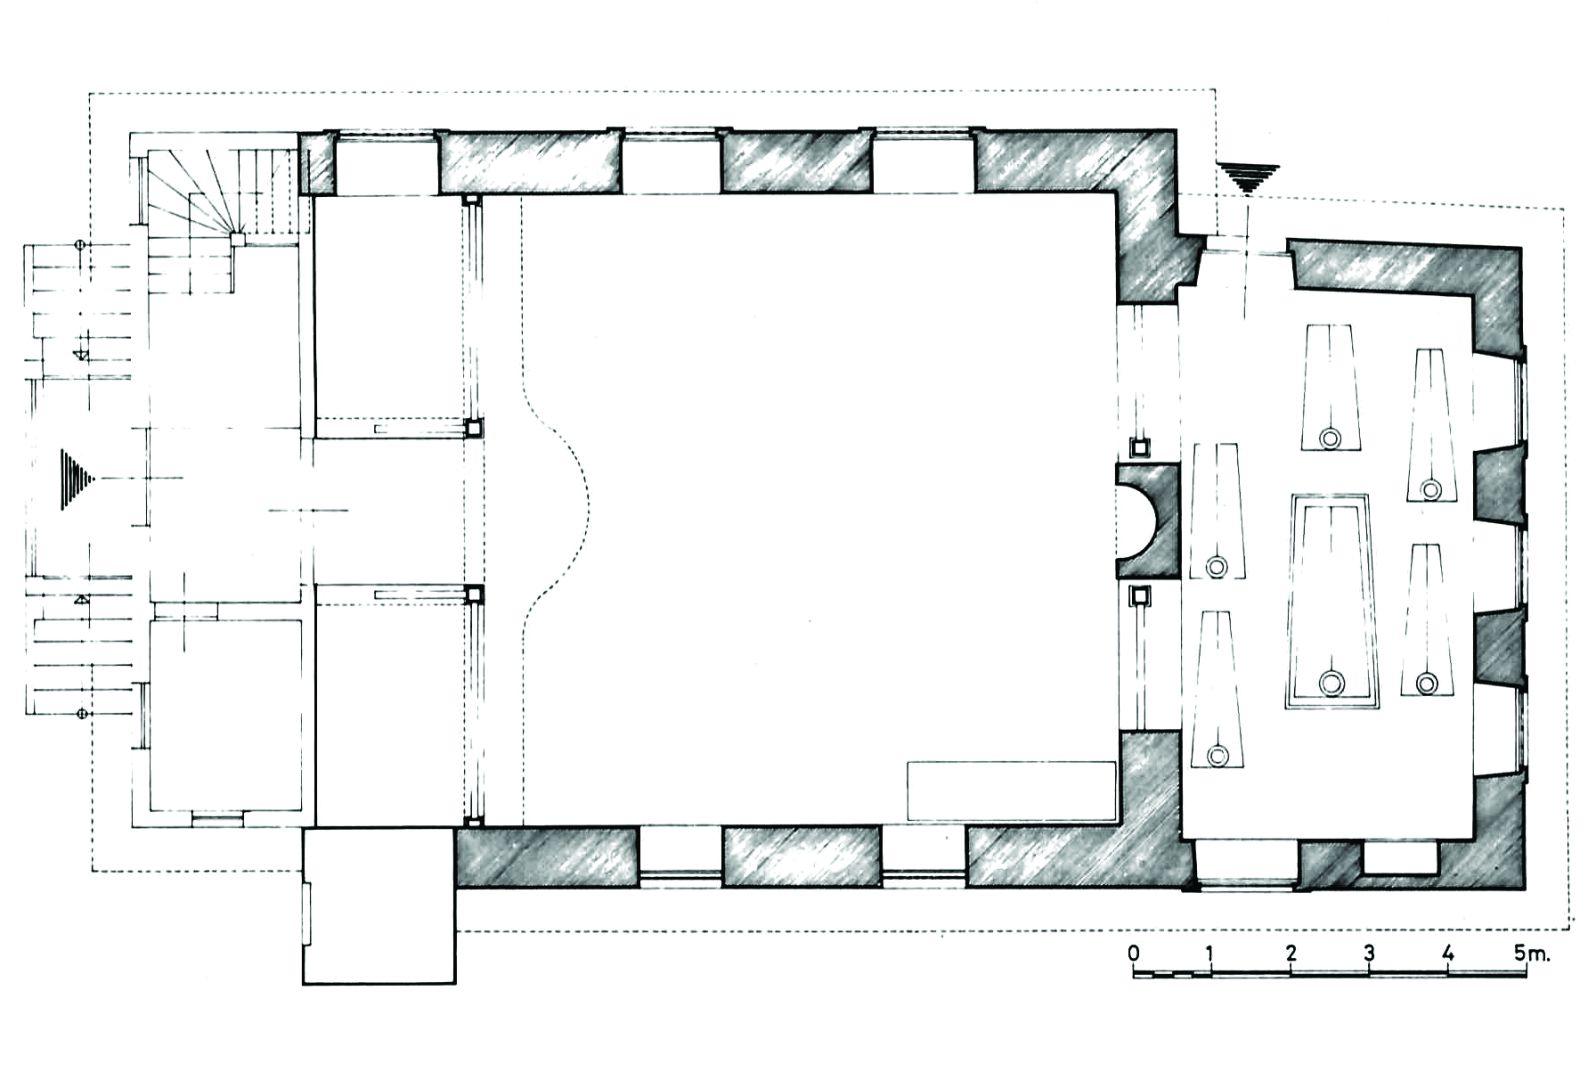 18- Cemalizade Sufi Lodge, the plan of the prayer house and tevhidhane ( M. Baha Tanman)